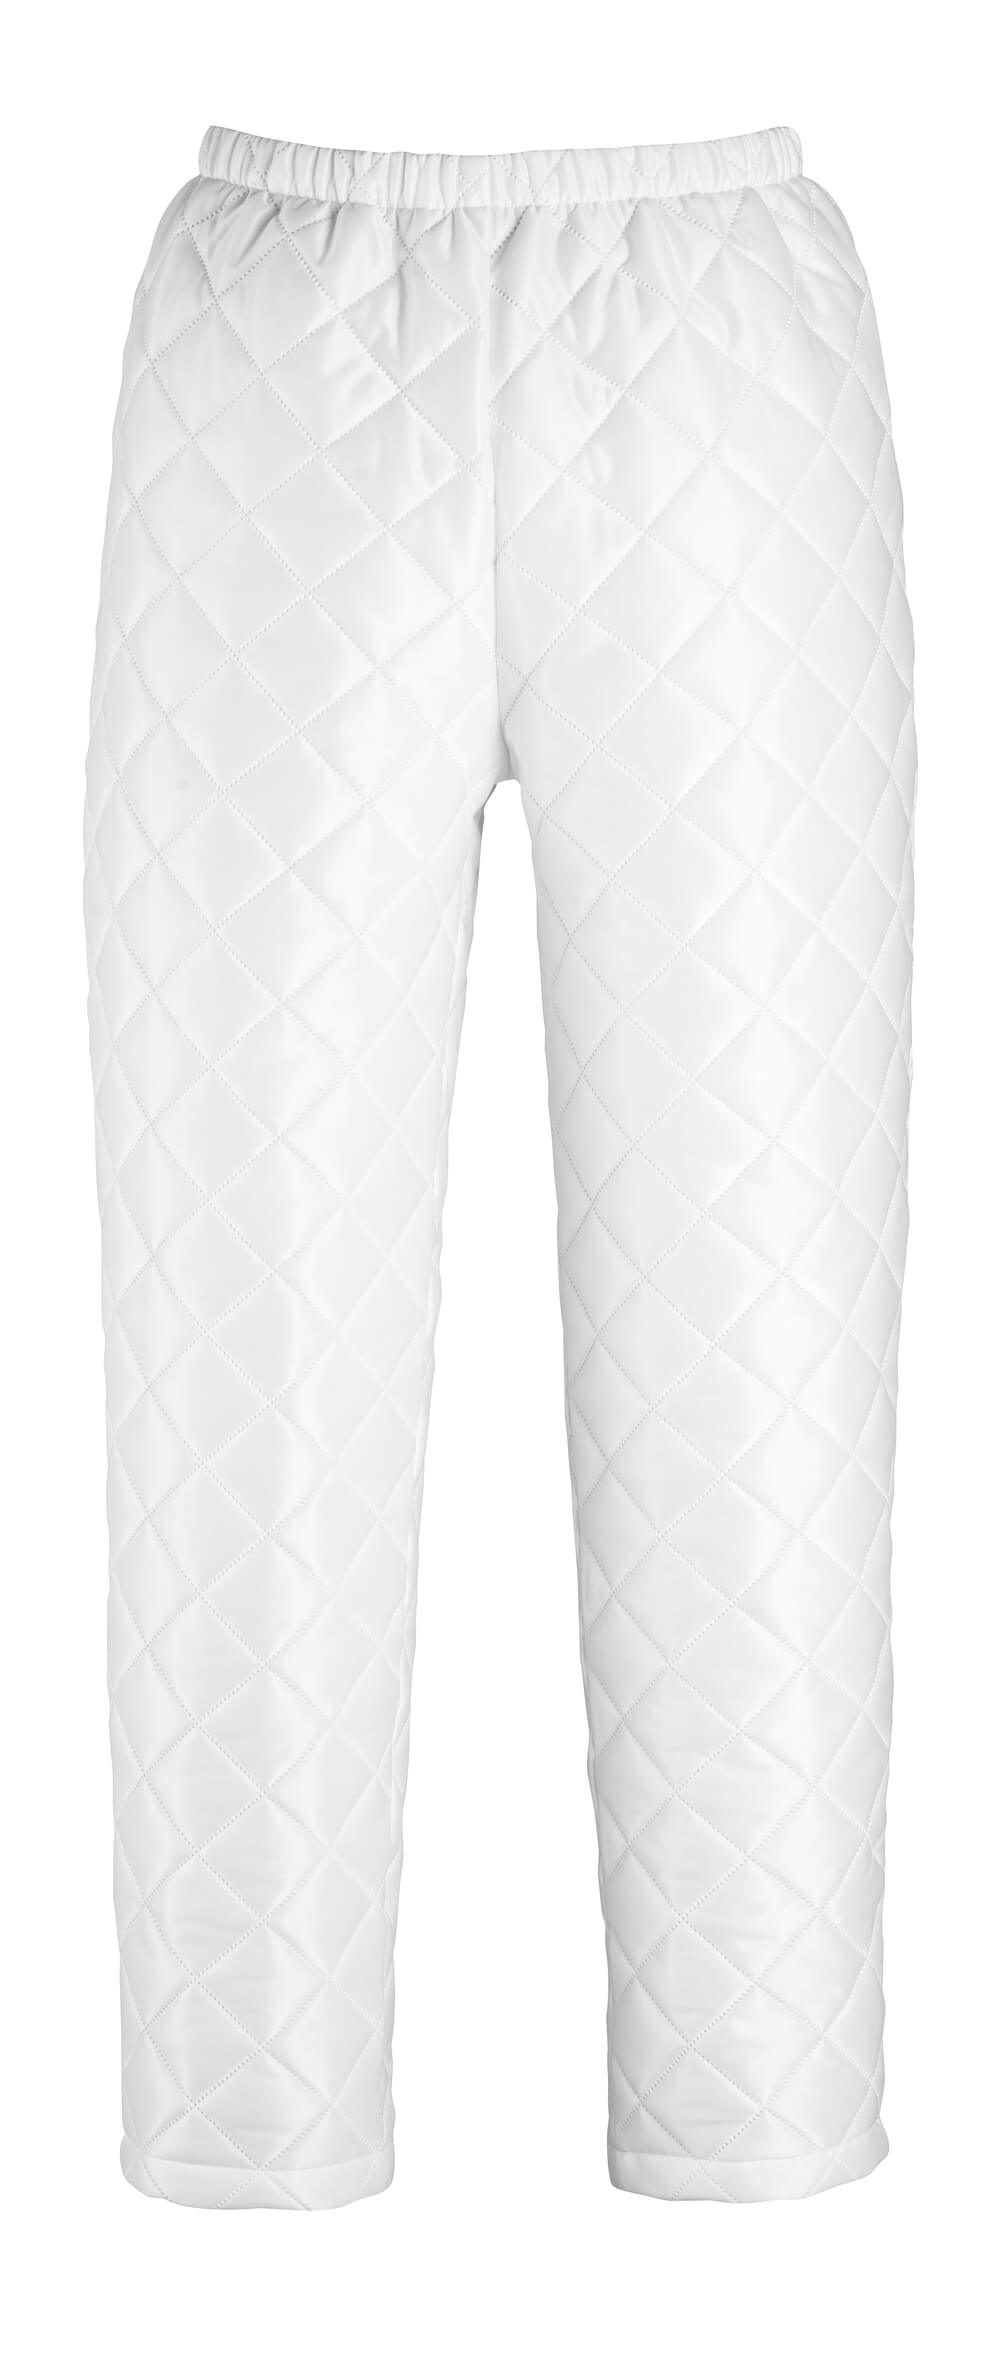 Buy Mens Thermal Trousers | Fast UK Delivery - Insight Clothing